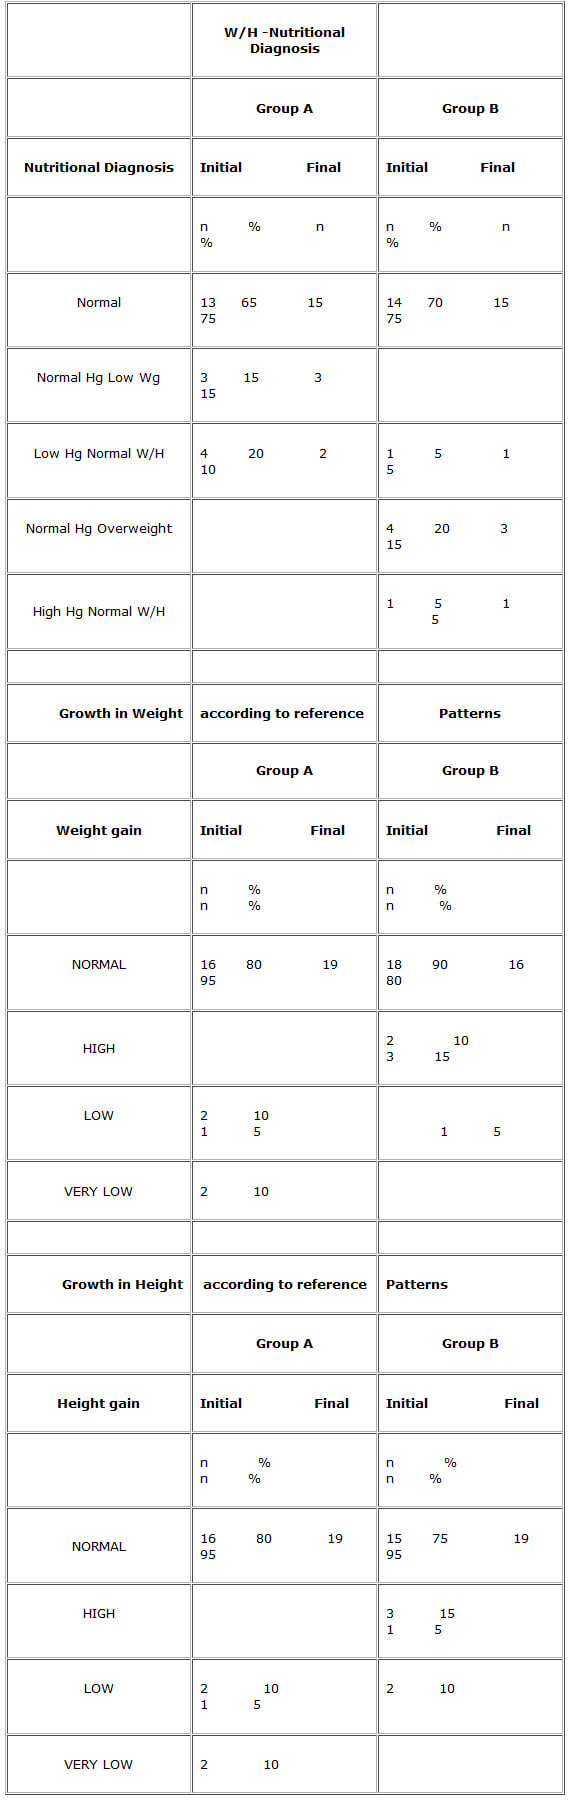 Table 3 Growth in Weight and Height according to reference patterns 